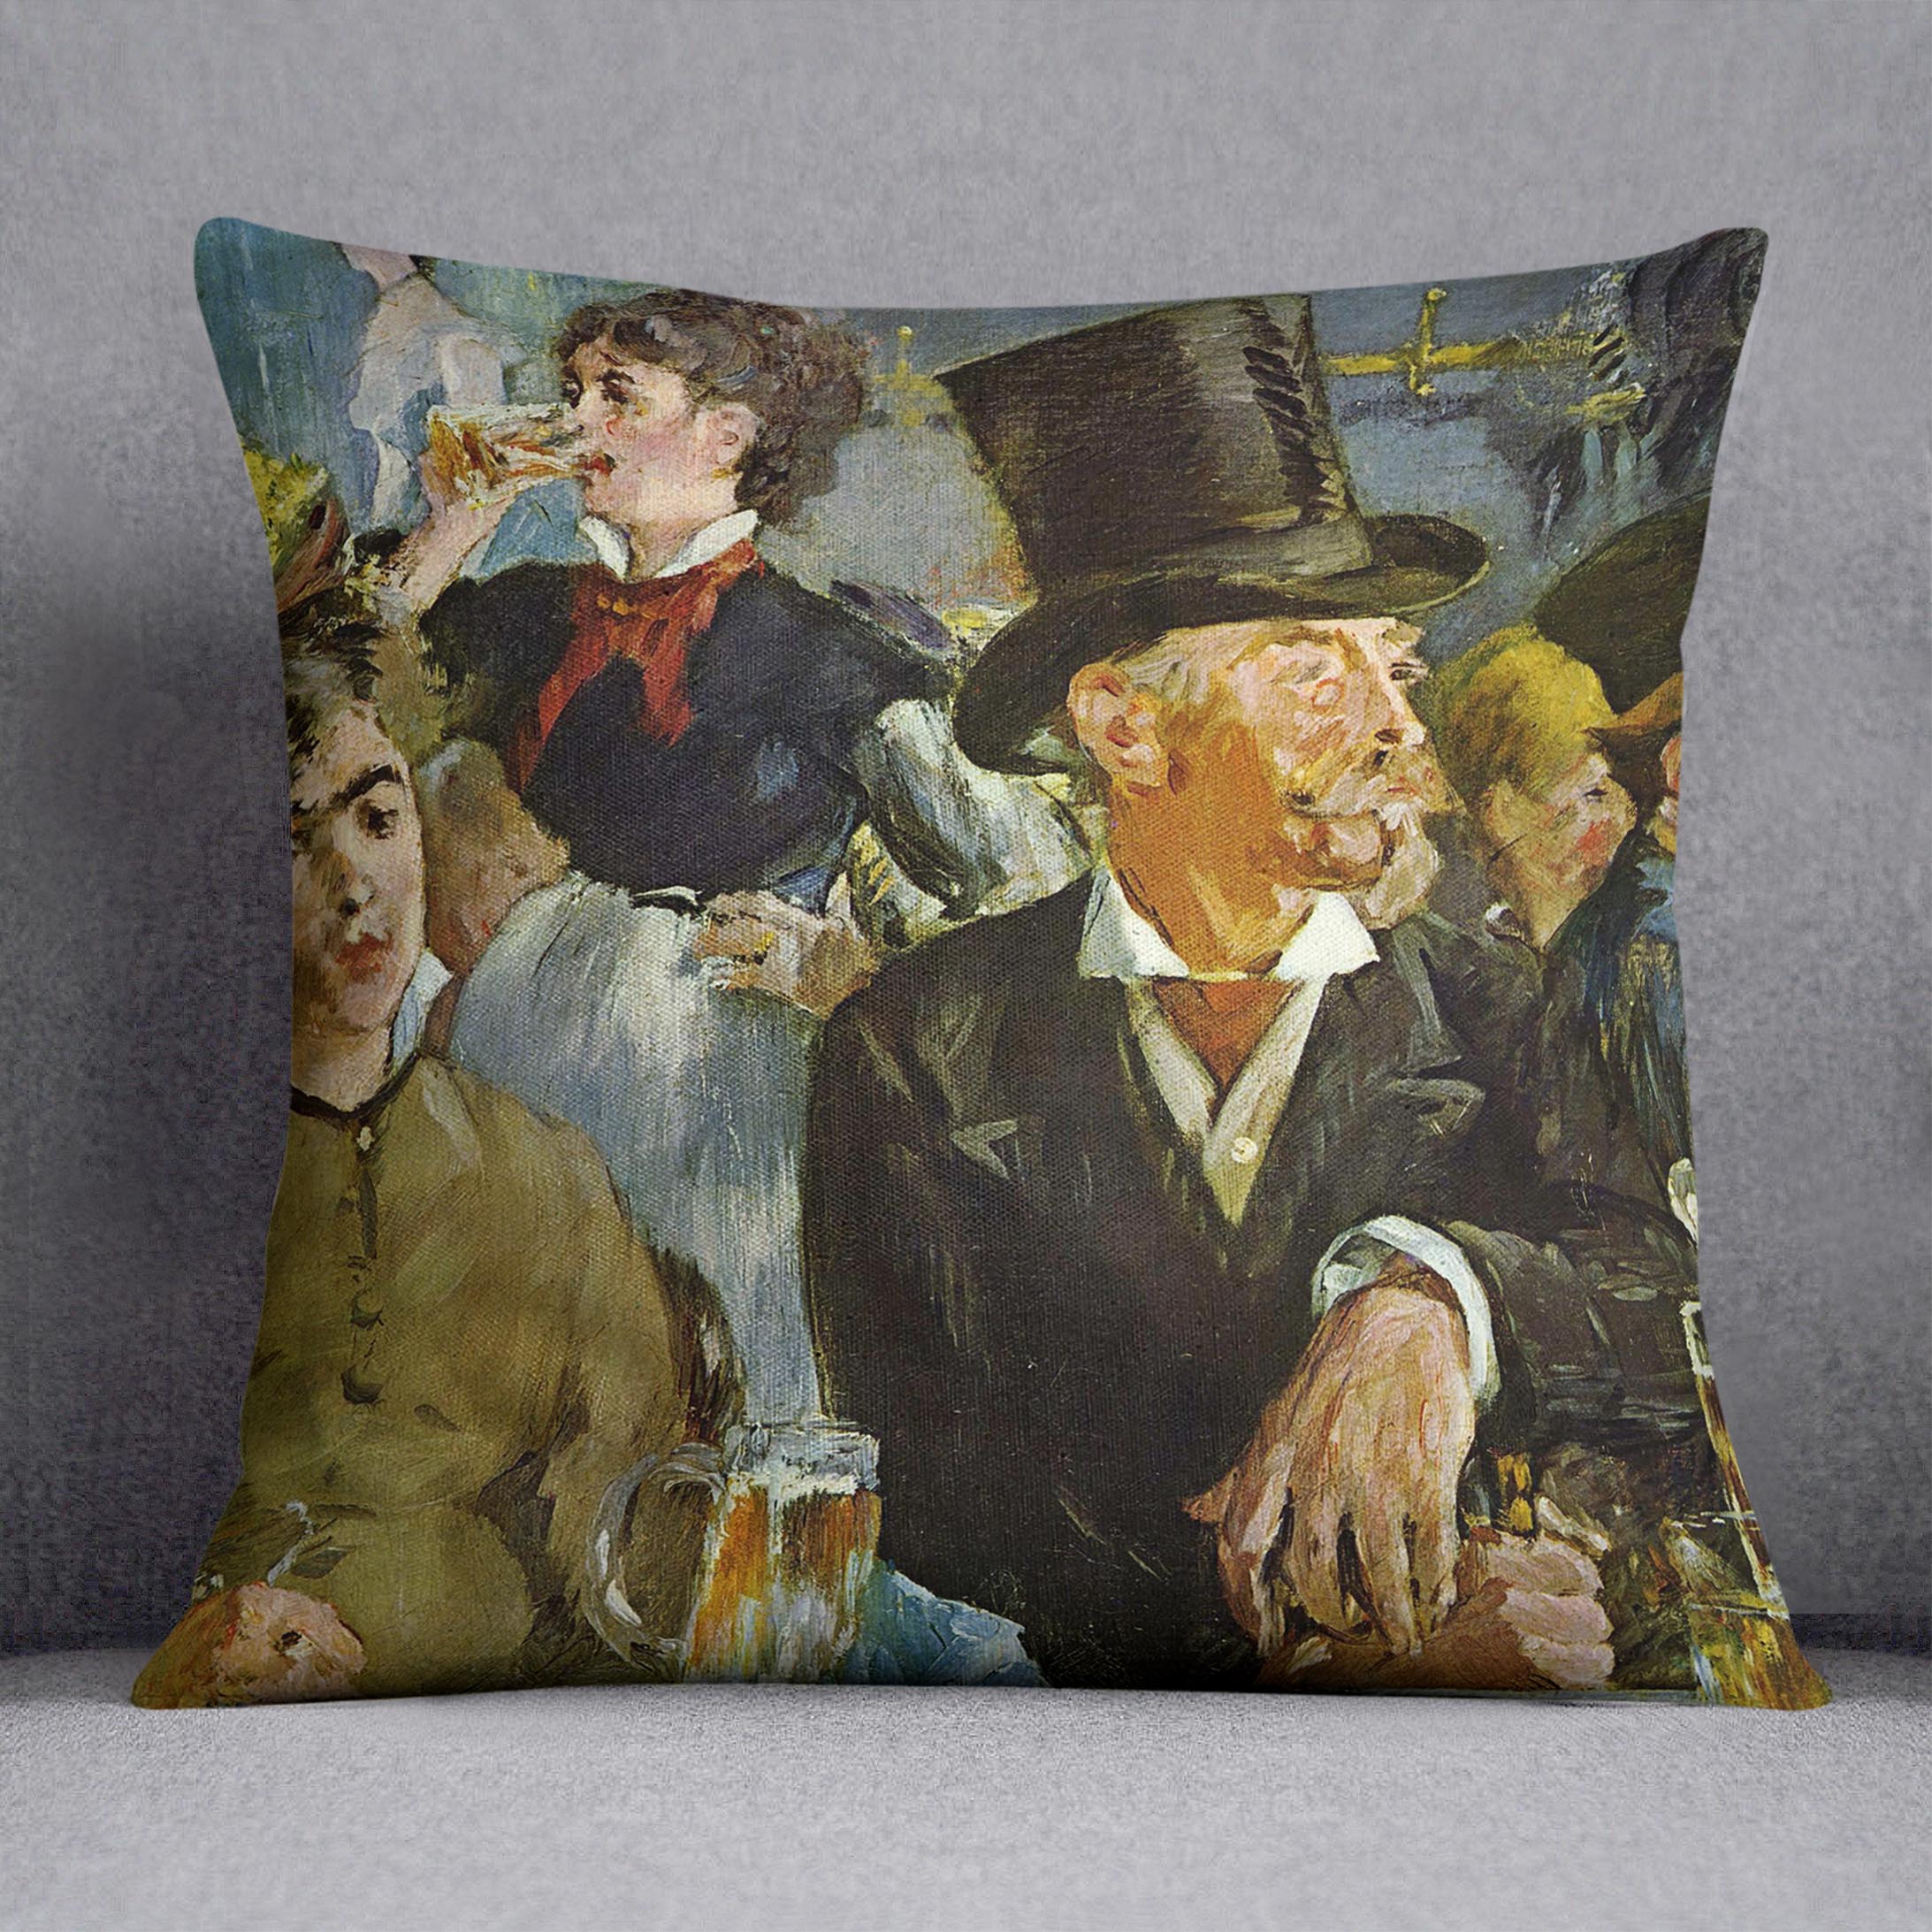 Cafe Concert by Manet Cushion